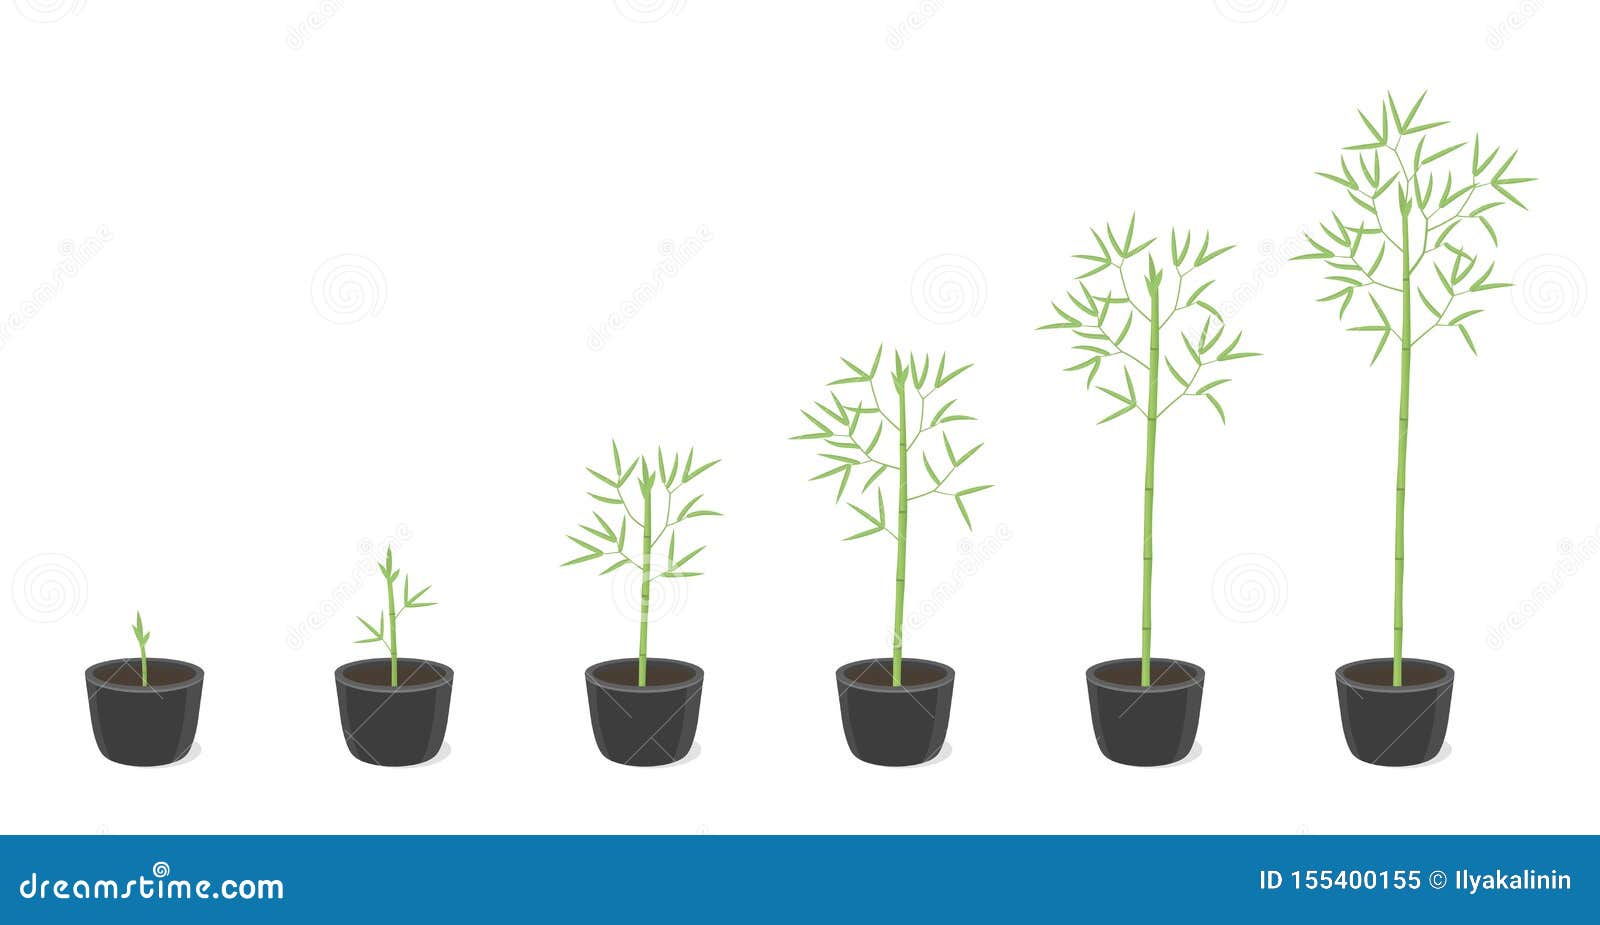 Bamboo Potted Growth Stages. Clumping Bamboos Ripening Period Progression.  Bambusa Bambos Tree Life Cycle Animation Plant Phases Stock Illustration -  Illustration of plant, home: 155400155